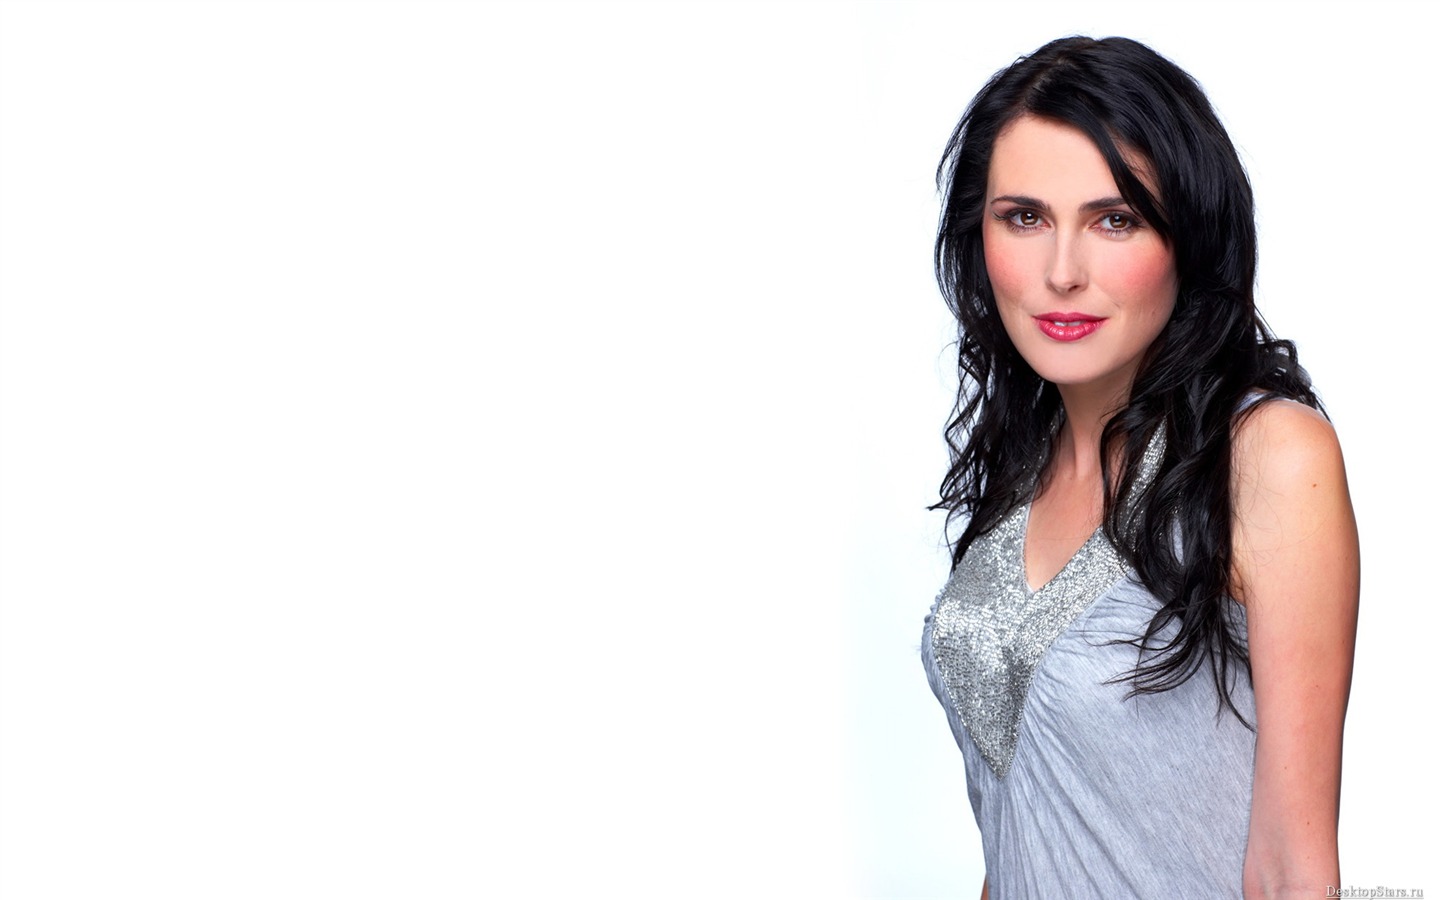 Sharon den Adel #007 - 1440x900 Wallpapers Pictures Photos Images